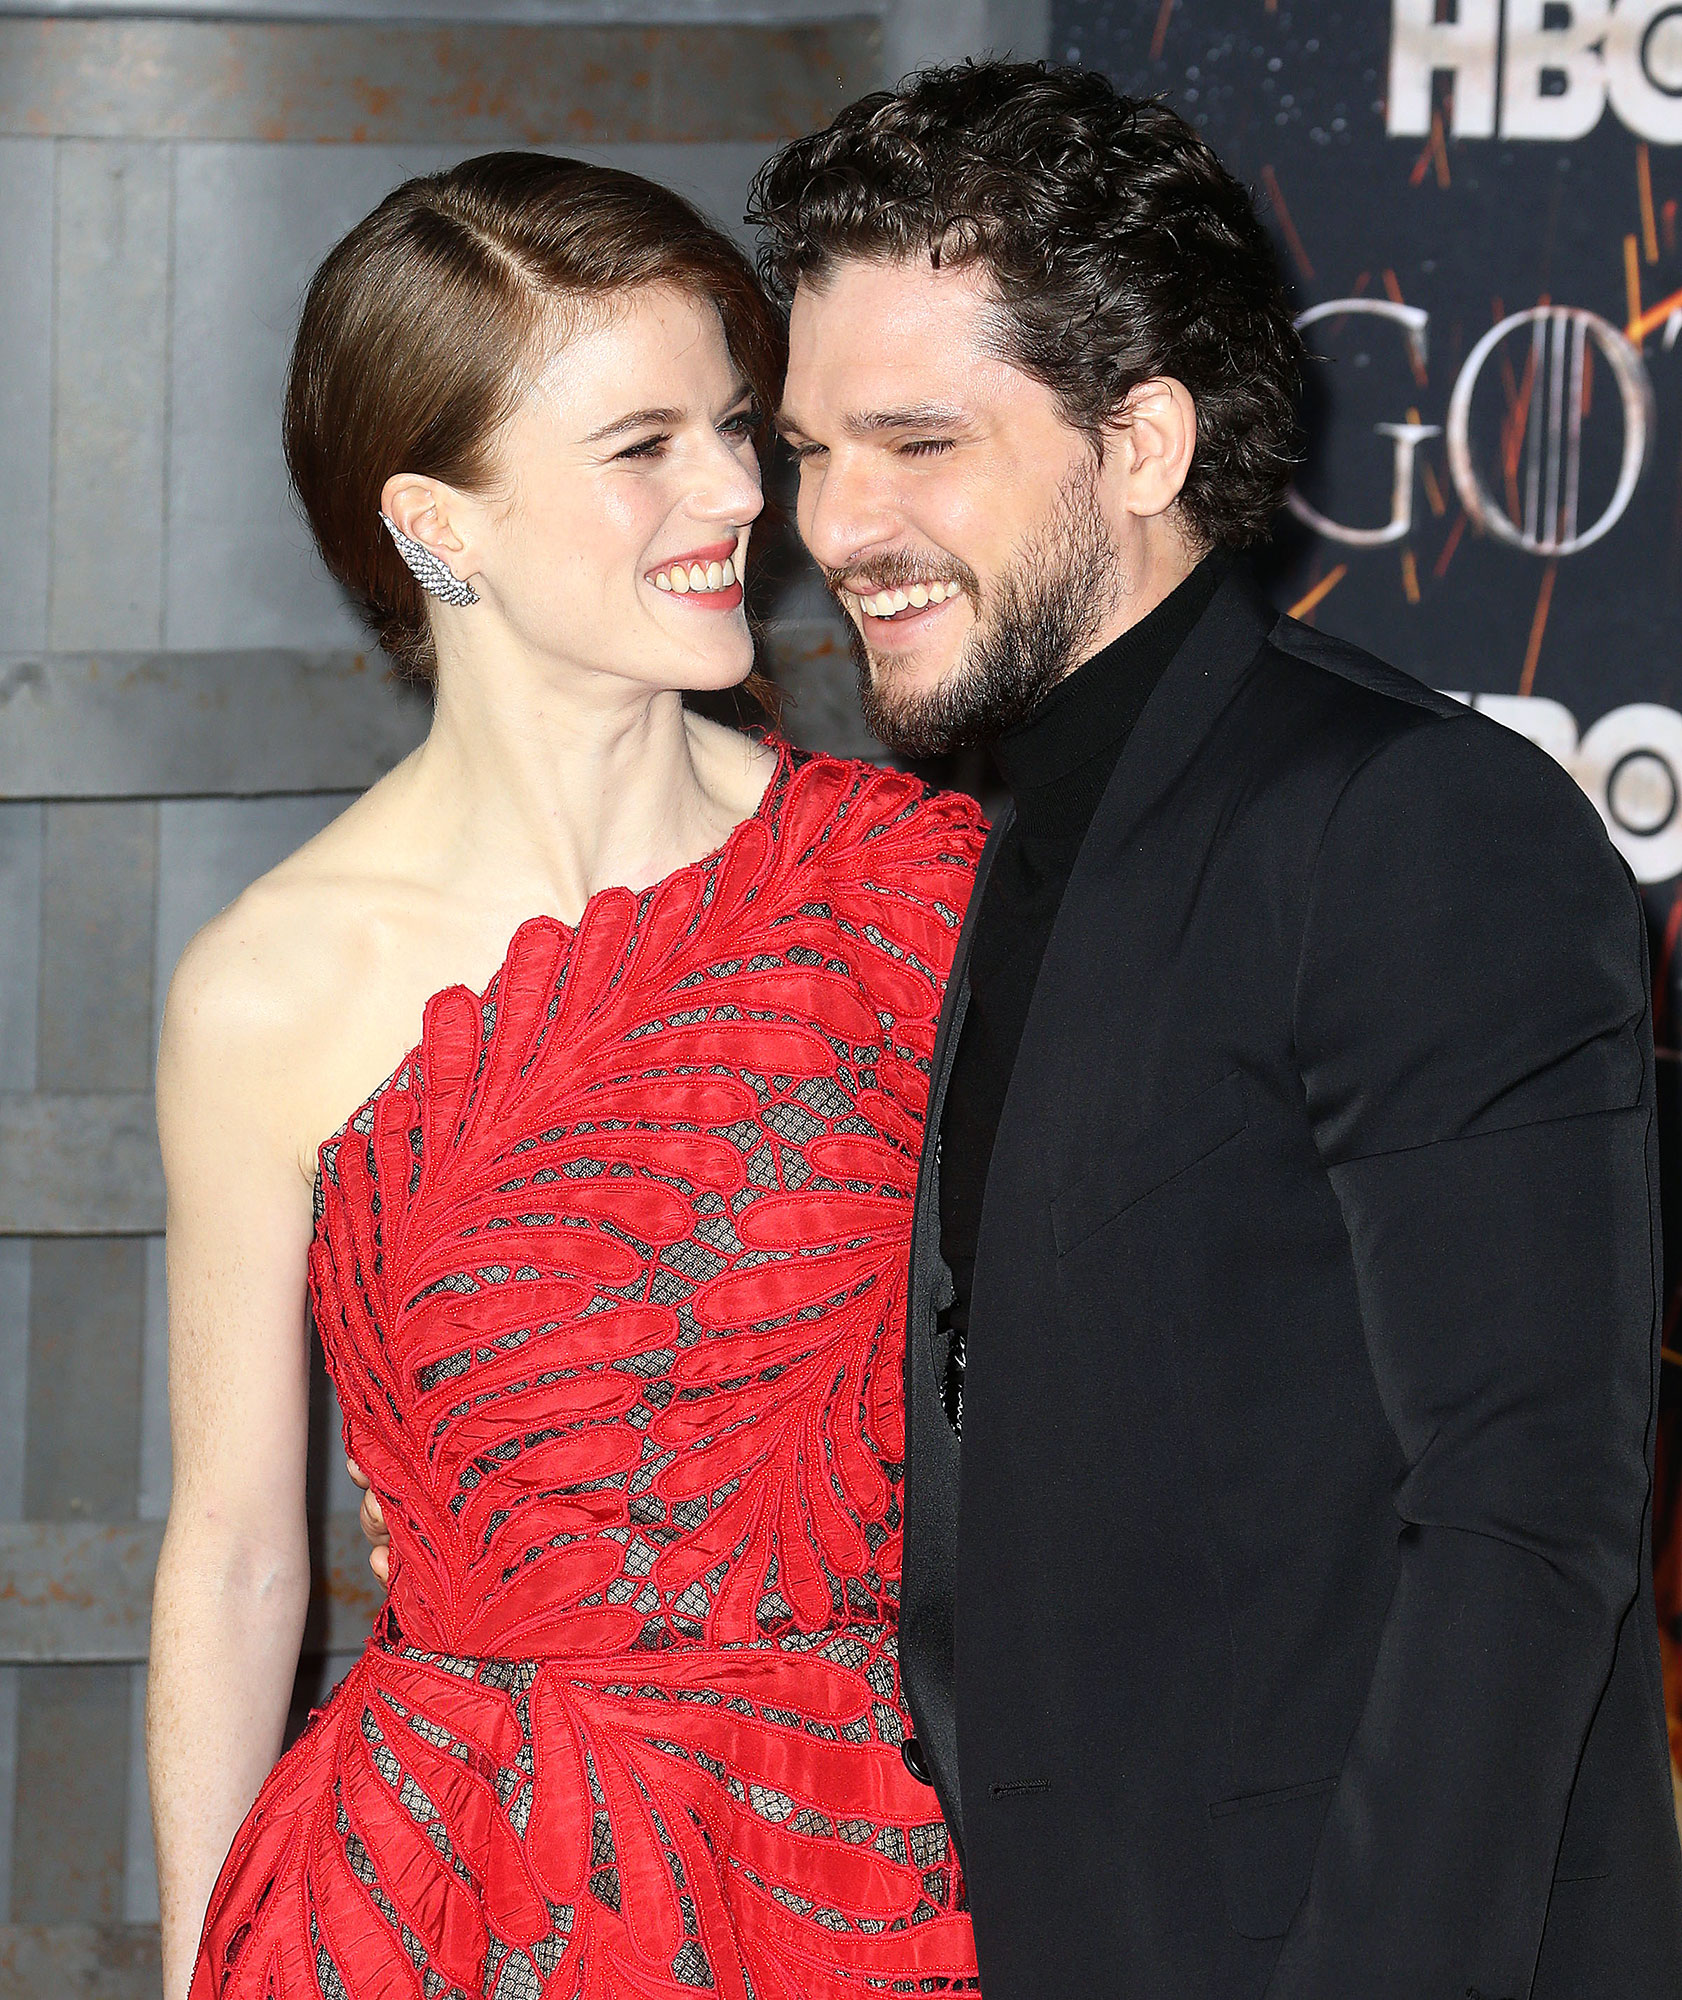 Beyond Winterfell: The Epic Love Story of Kit Harington and Rose Leslie ...